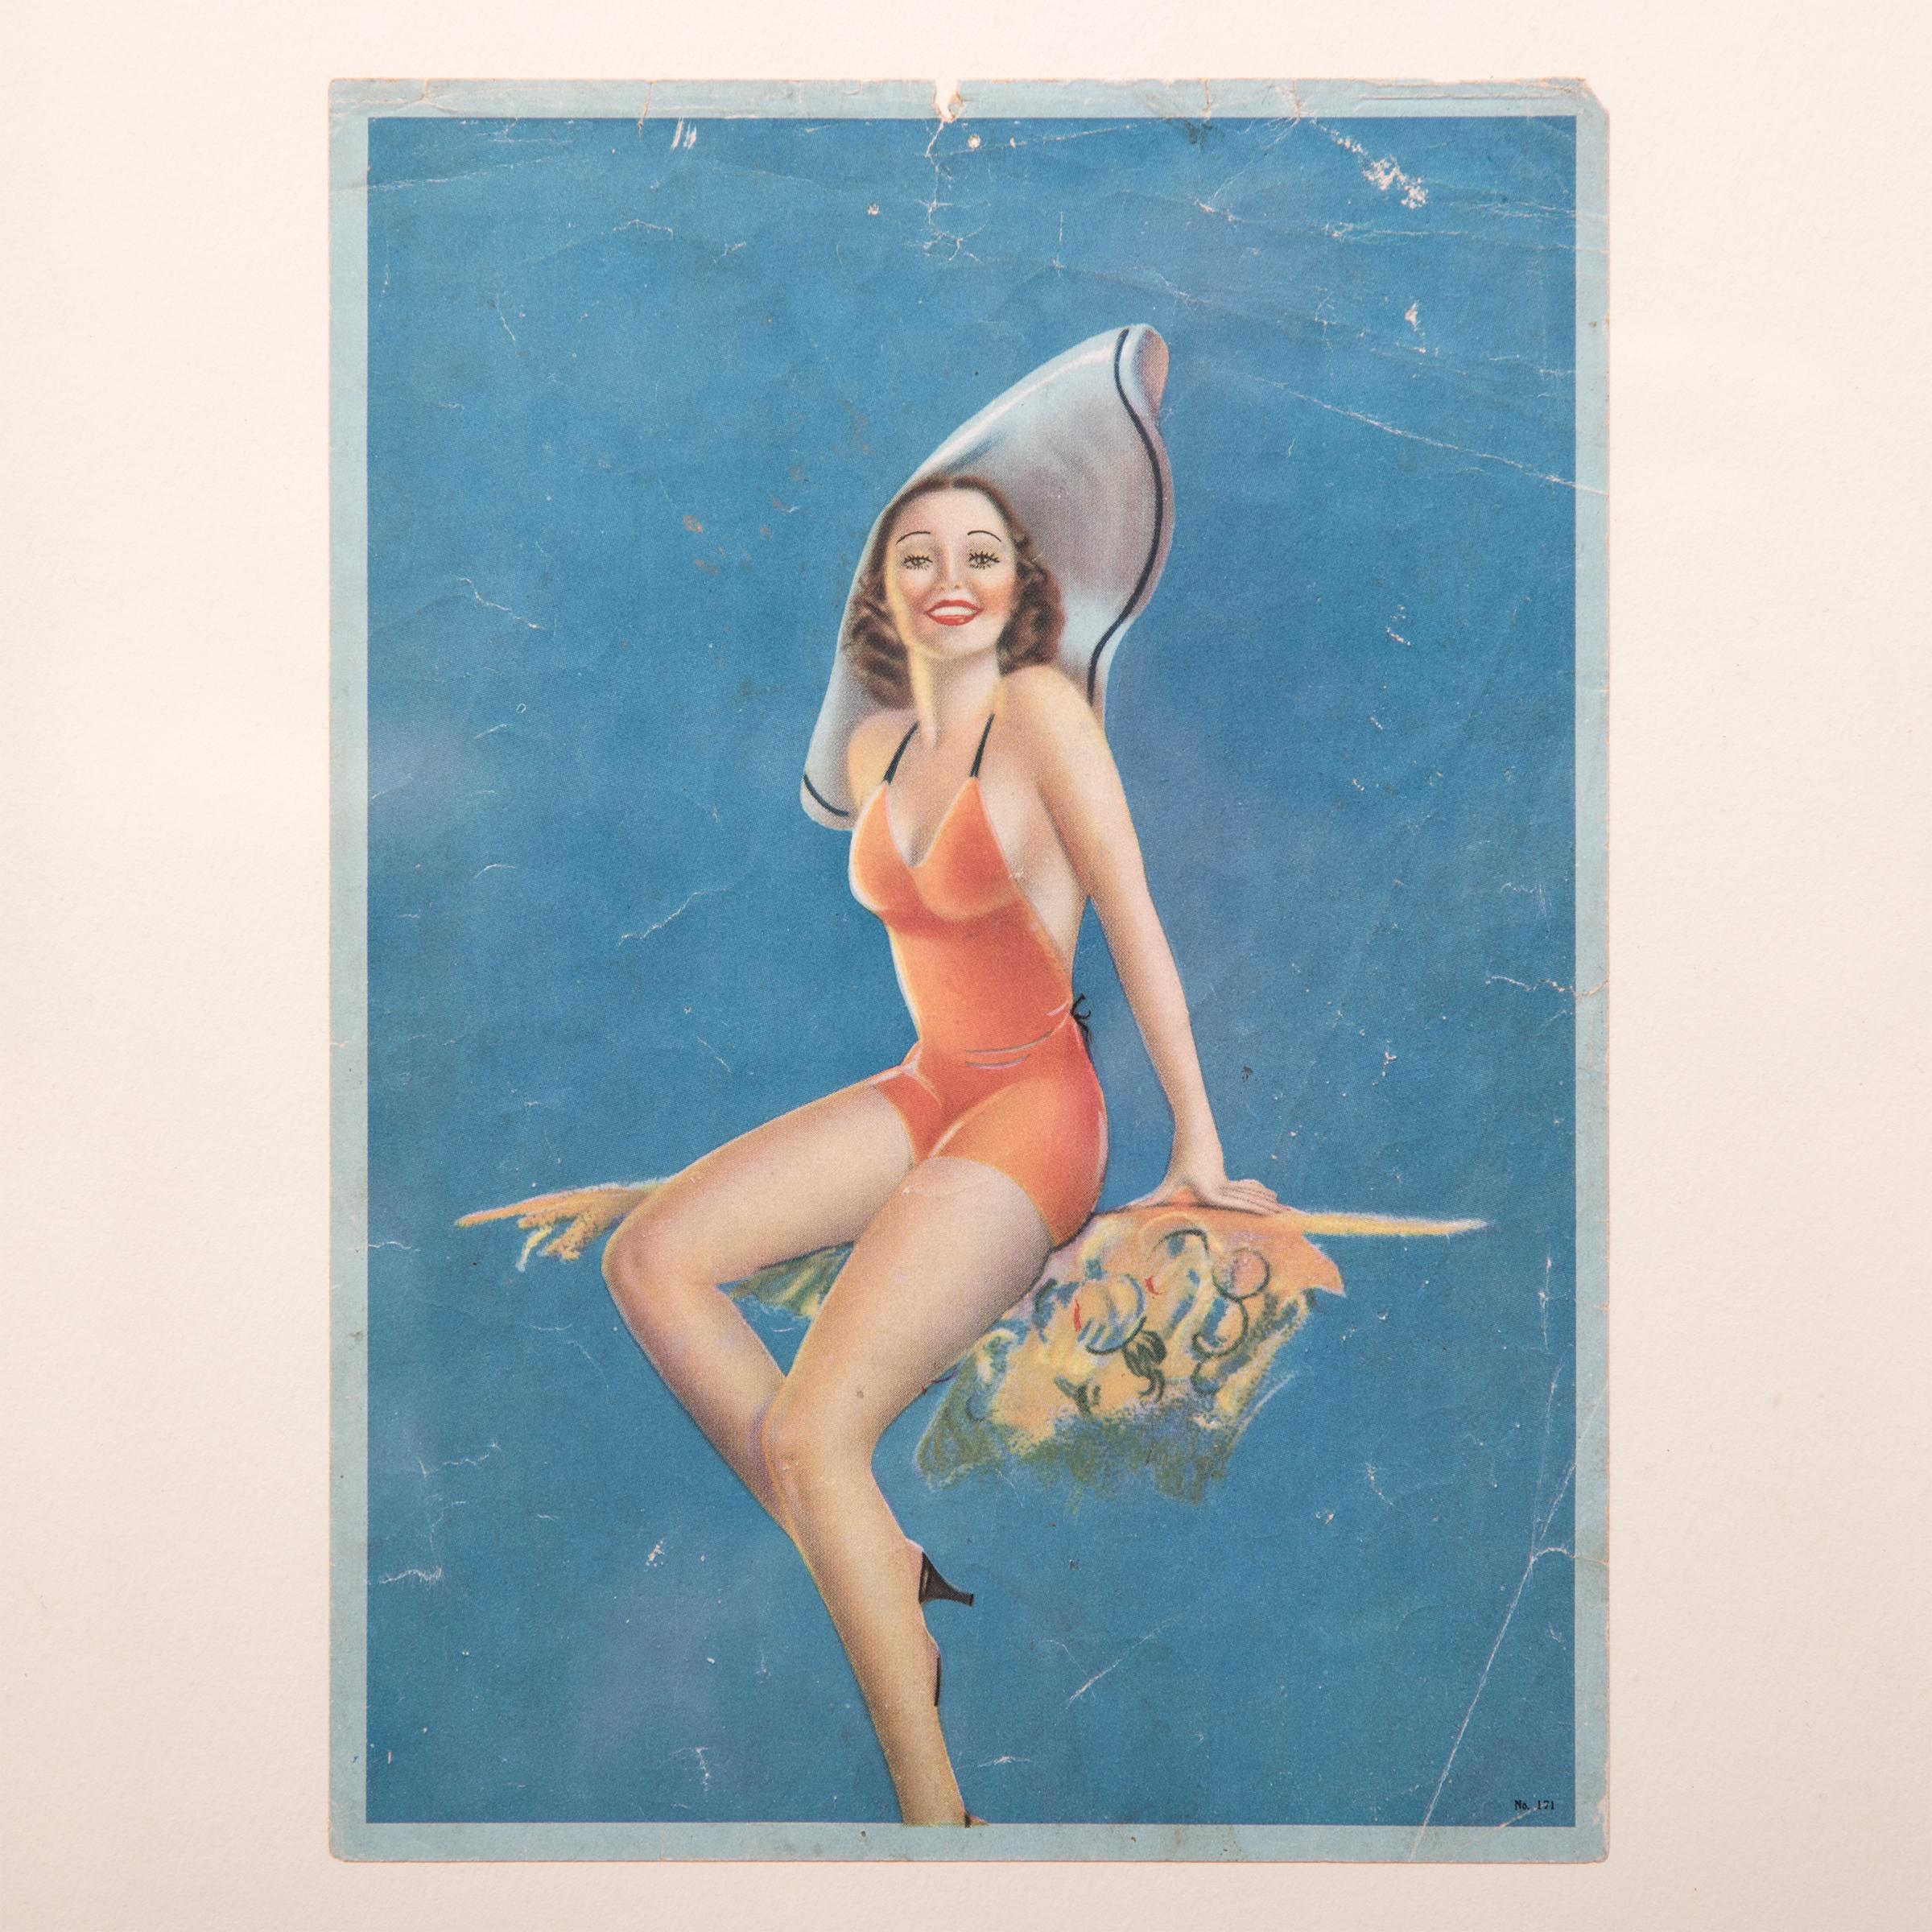 In tandem with a growing number of newspapers and periodicals, print advertising proliferated during China’s Republic Era. A bathing beauty is the star attraction of this print ad from around 1920. With Western features, a body-conscious pose, and a